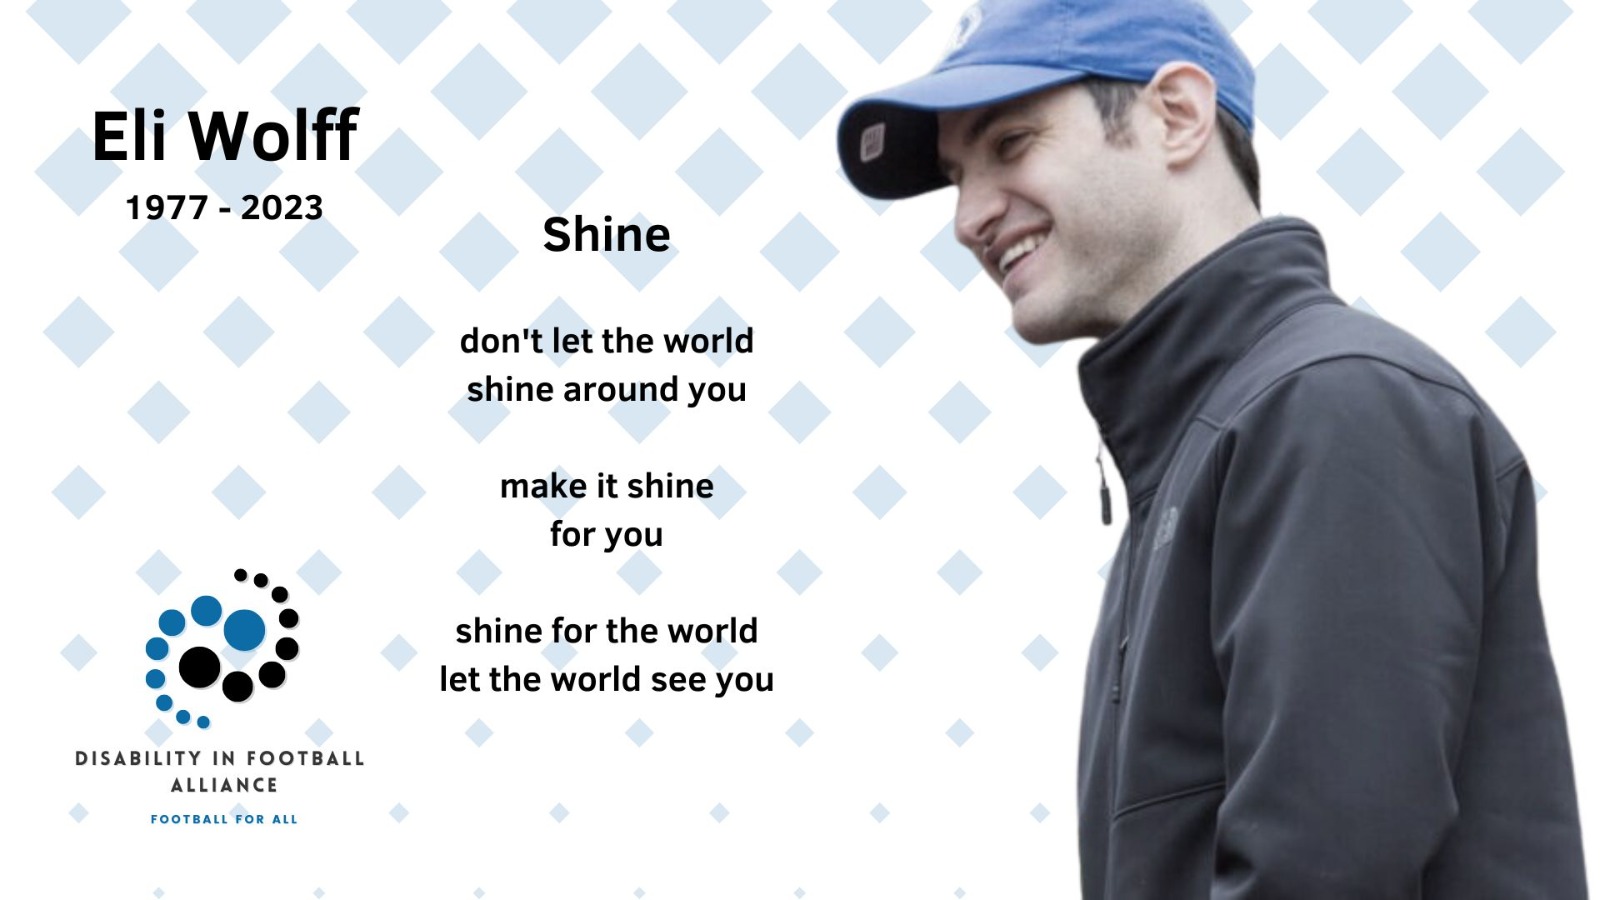 Poster featuring Eli A. Wolff in a dark grey jumper and blue cap, smiling, mentioning dates of birth 1977 and death 2023. Poster includes the Disability in Football Alliance logo and a poem by Eli titled "Shine" don't let the world shine around you make it shine for you shine for the world let the world see you